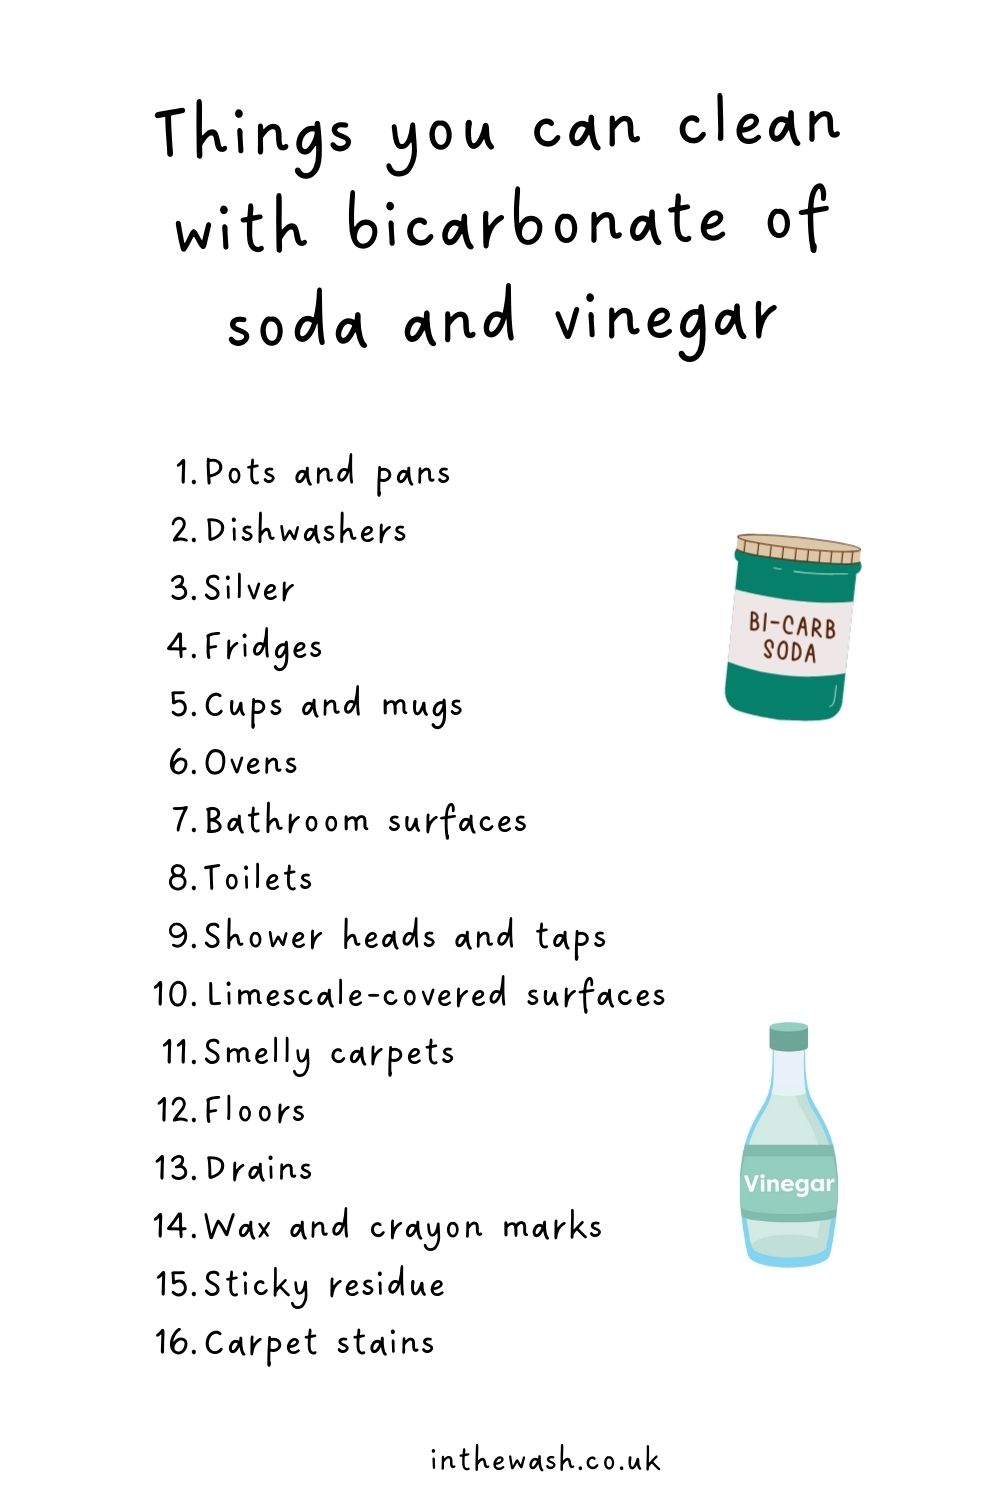 Things you can clean with bicarbonate of soda and vinegar